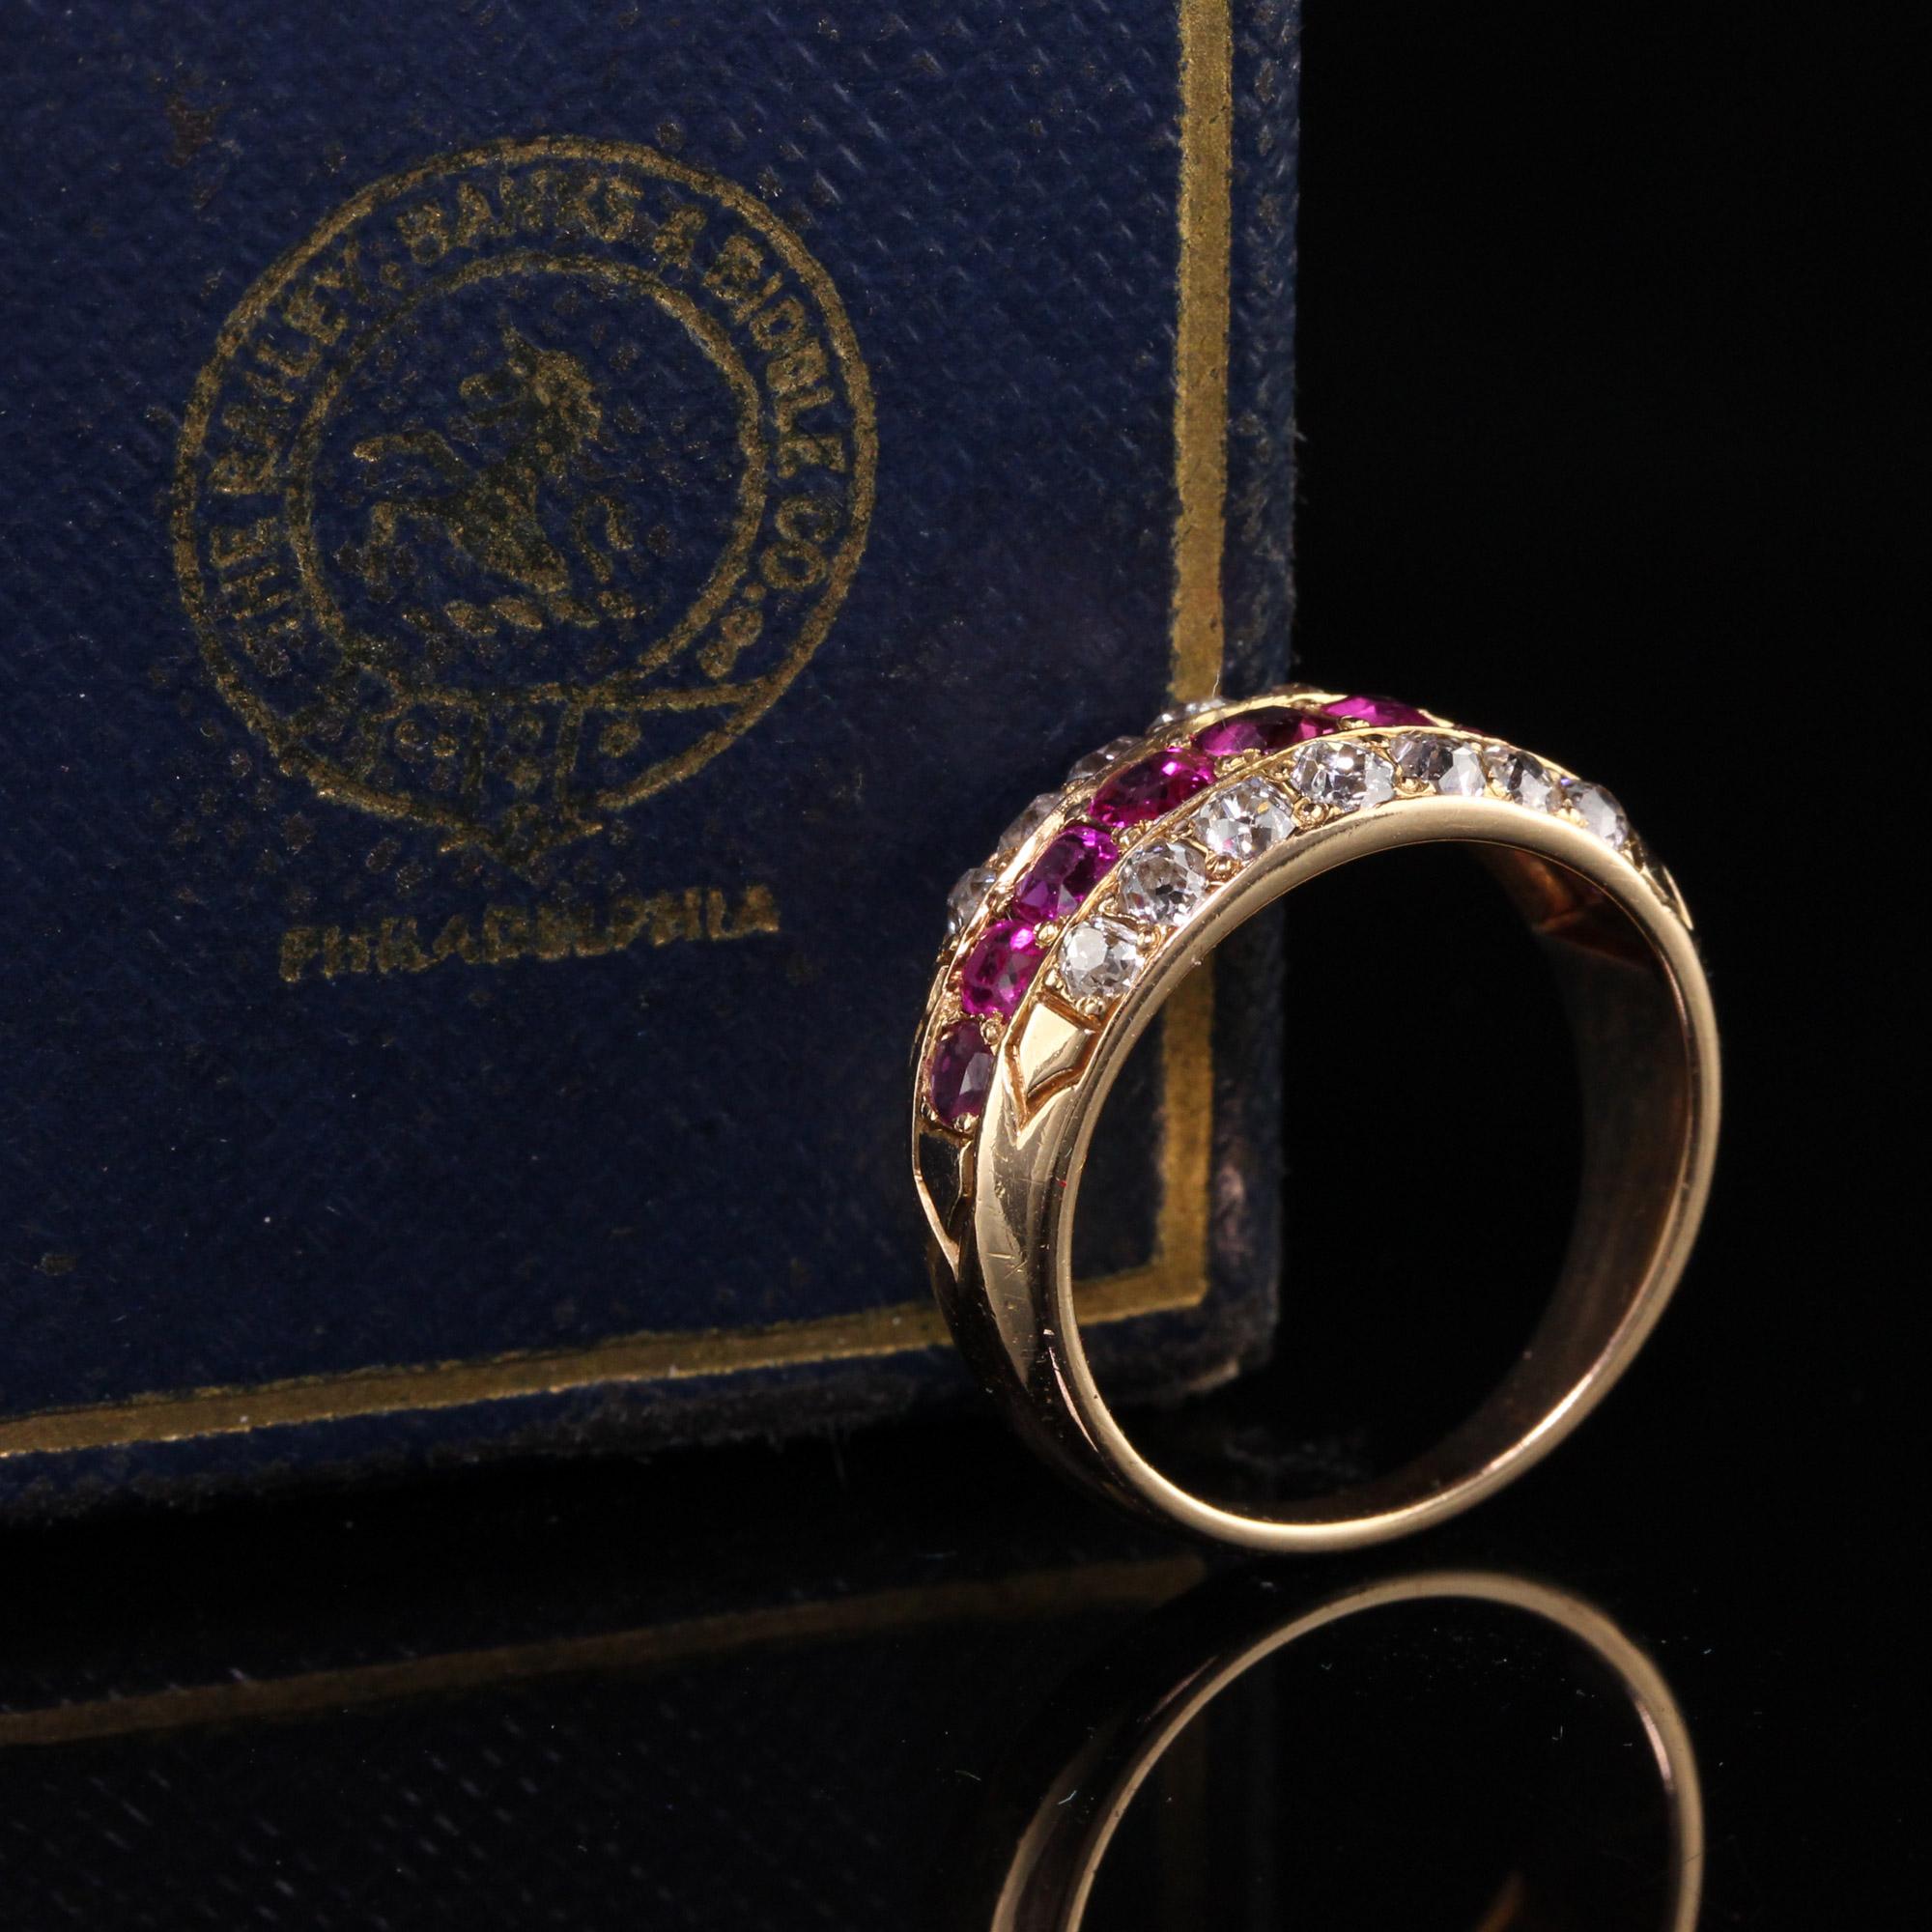 Beautiful Antique Art Deco Bailey Banks and Biddle 18K Rose Gold Diamond and Ruby Band. This incredible ring has a row of beautiful burmese rubies that are nice and bright with 2 rows of chunky old mine cut diamonds above and below in rose